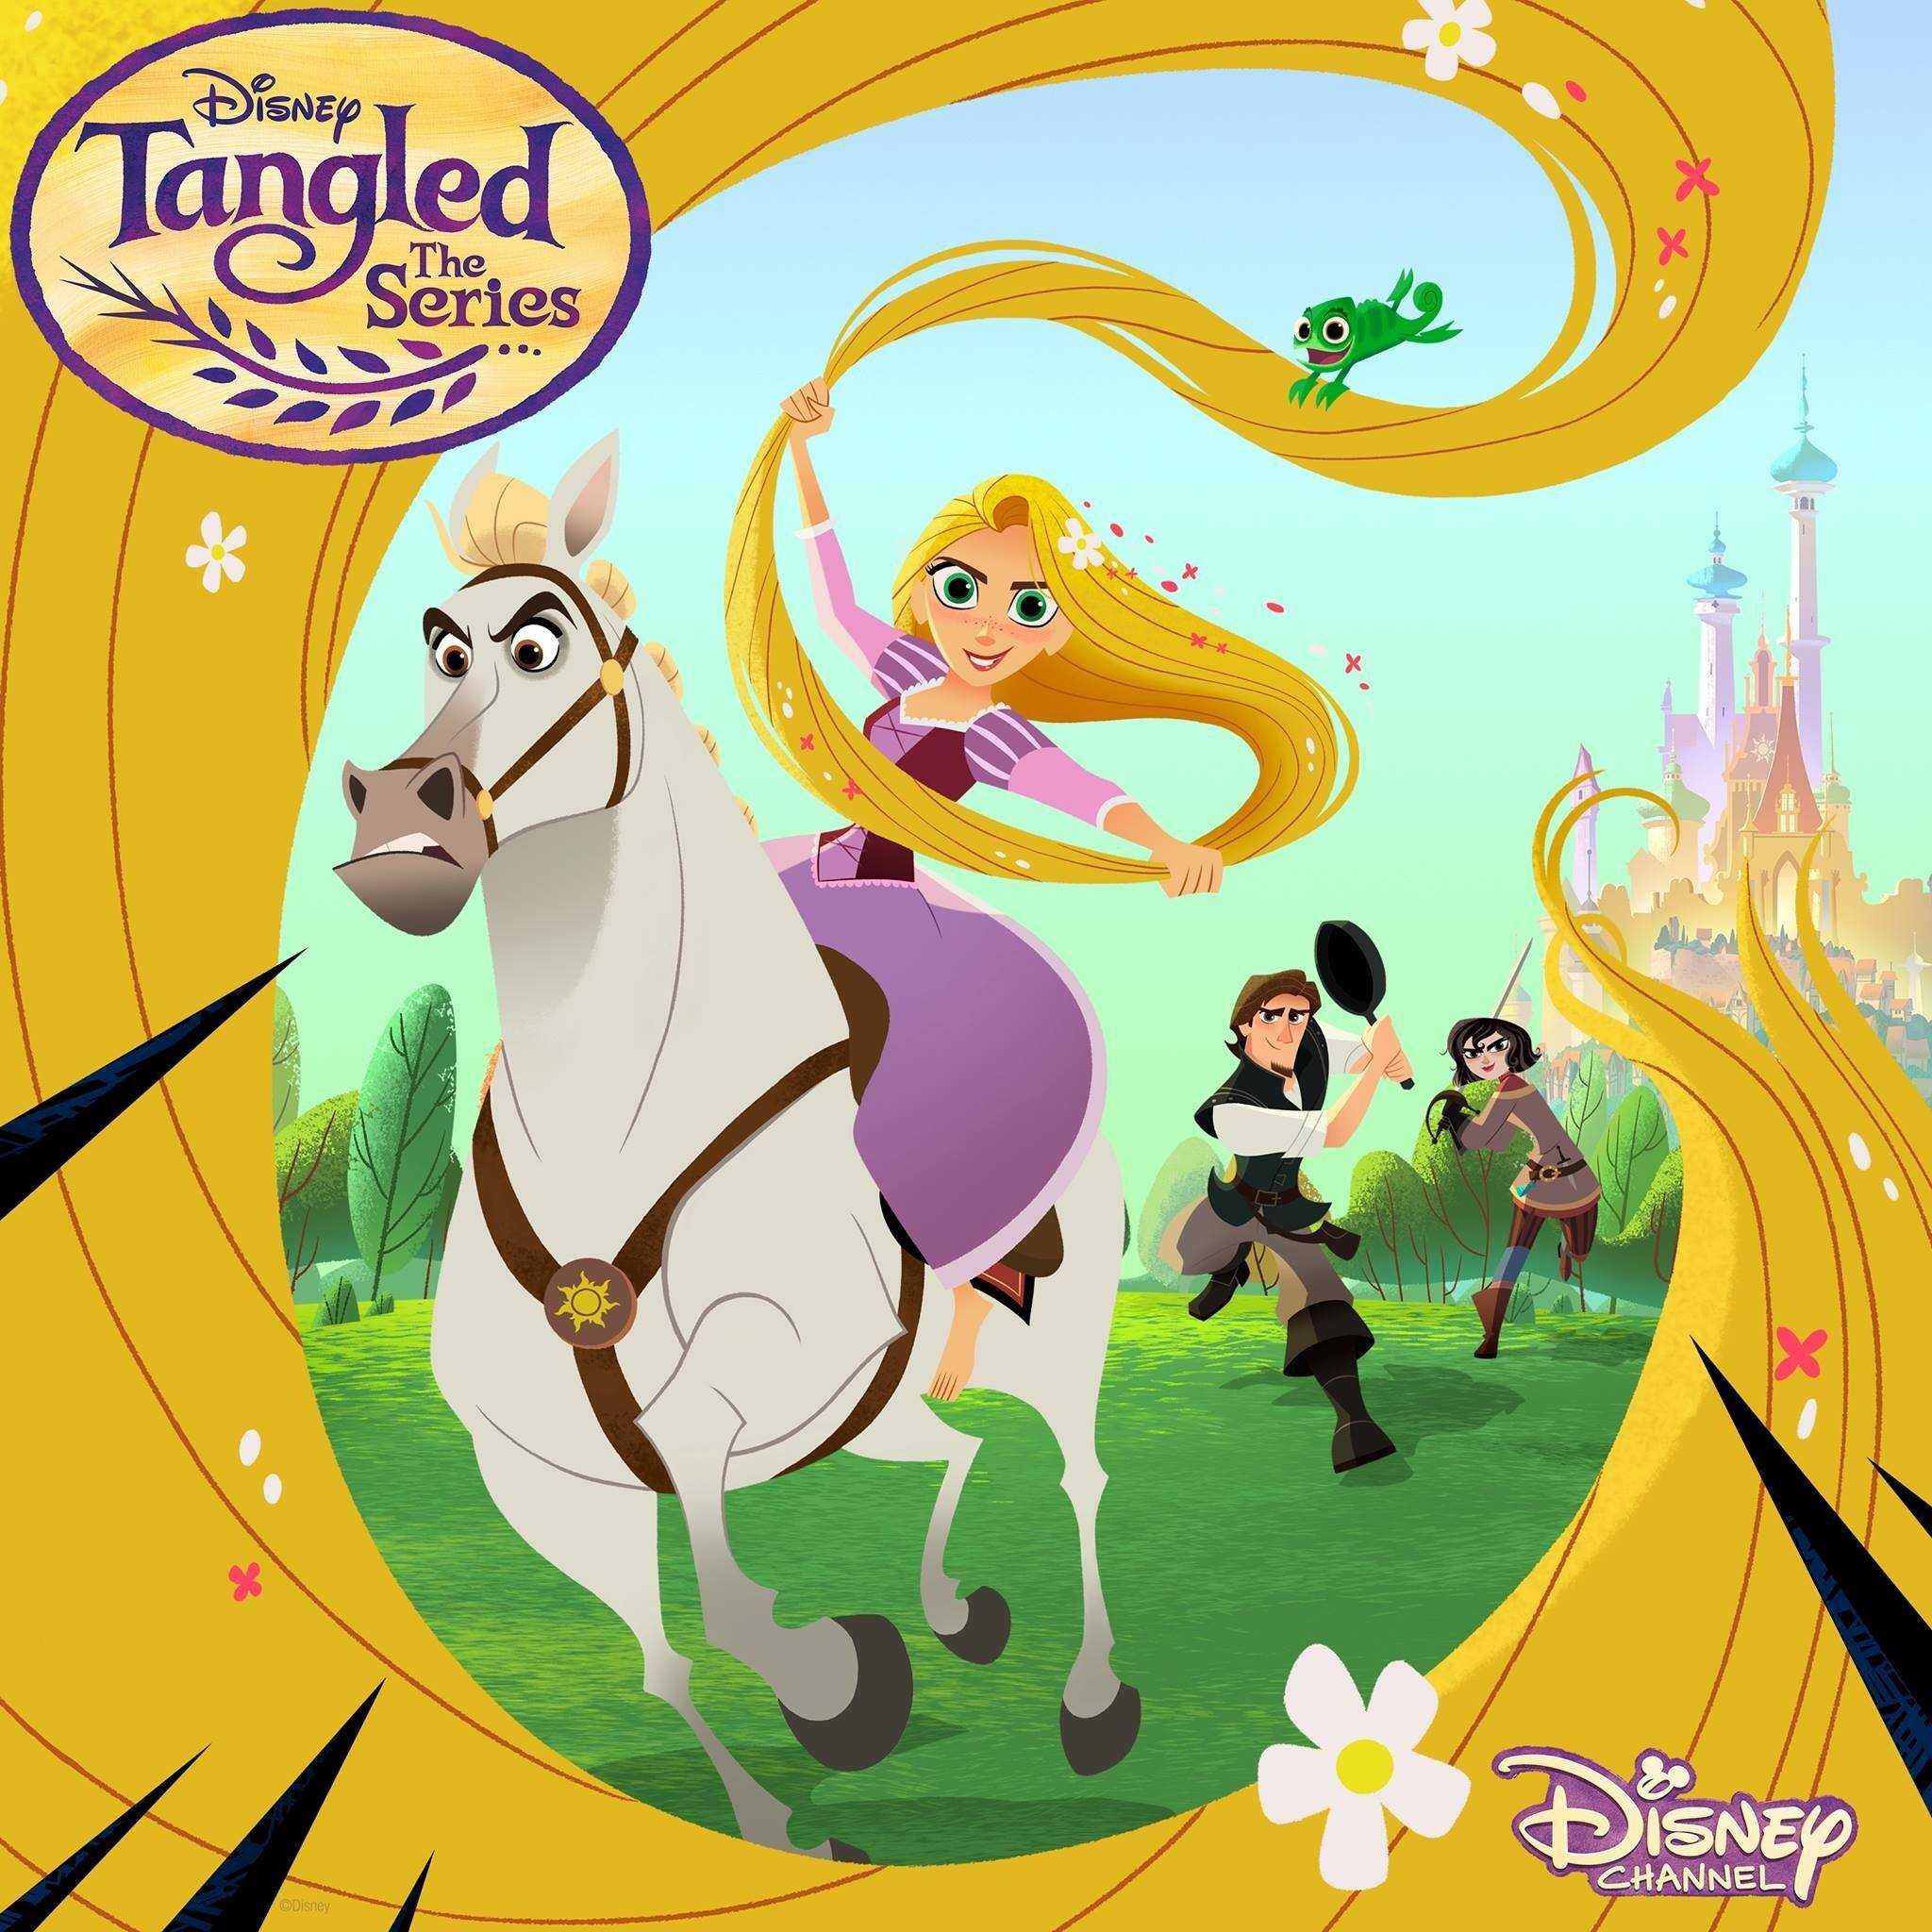 Watch Tangled Full movie Online In HD | Find where to watch it online on  Justdial Germany